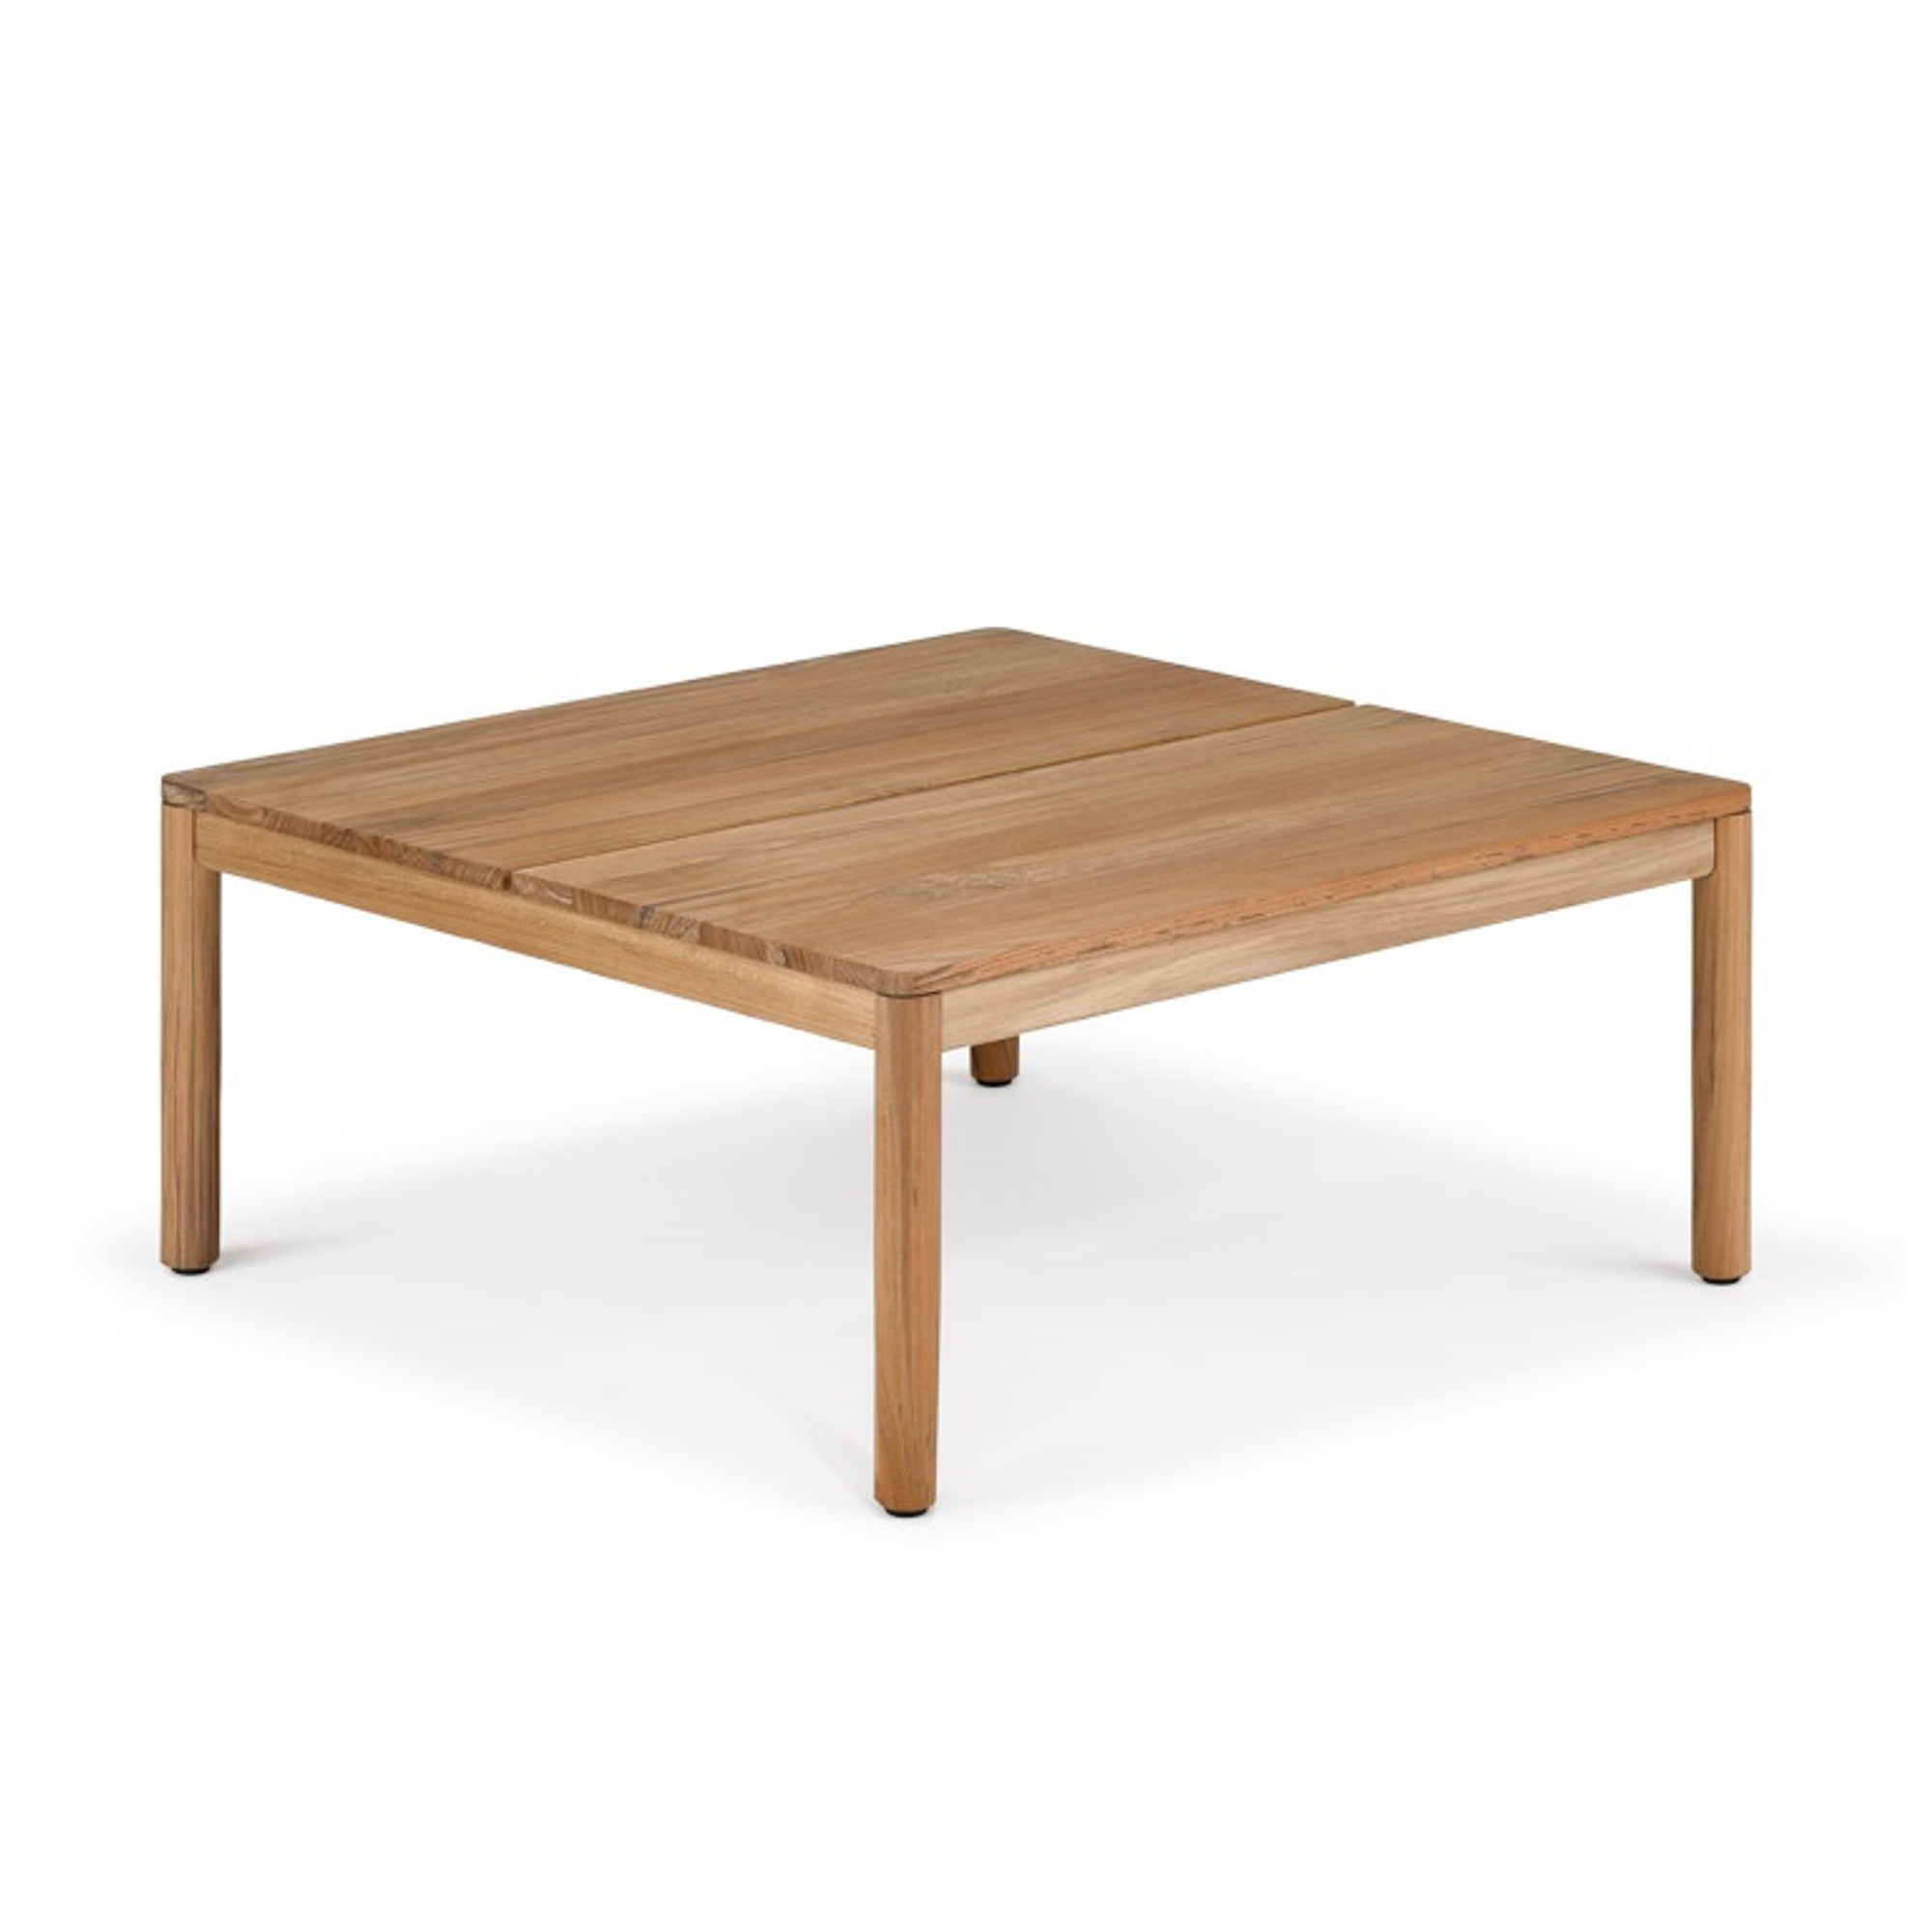 TIBBO COFFEE TABLE, by DEDON